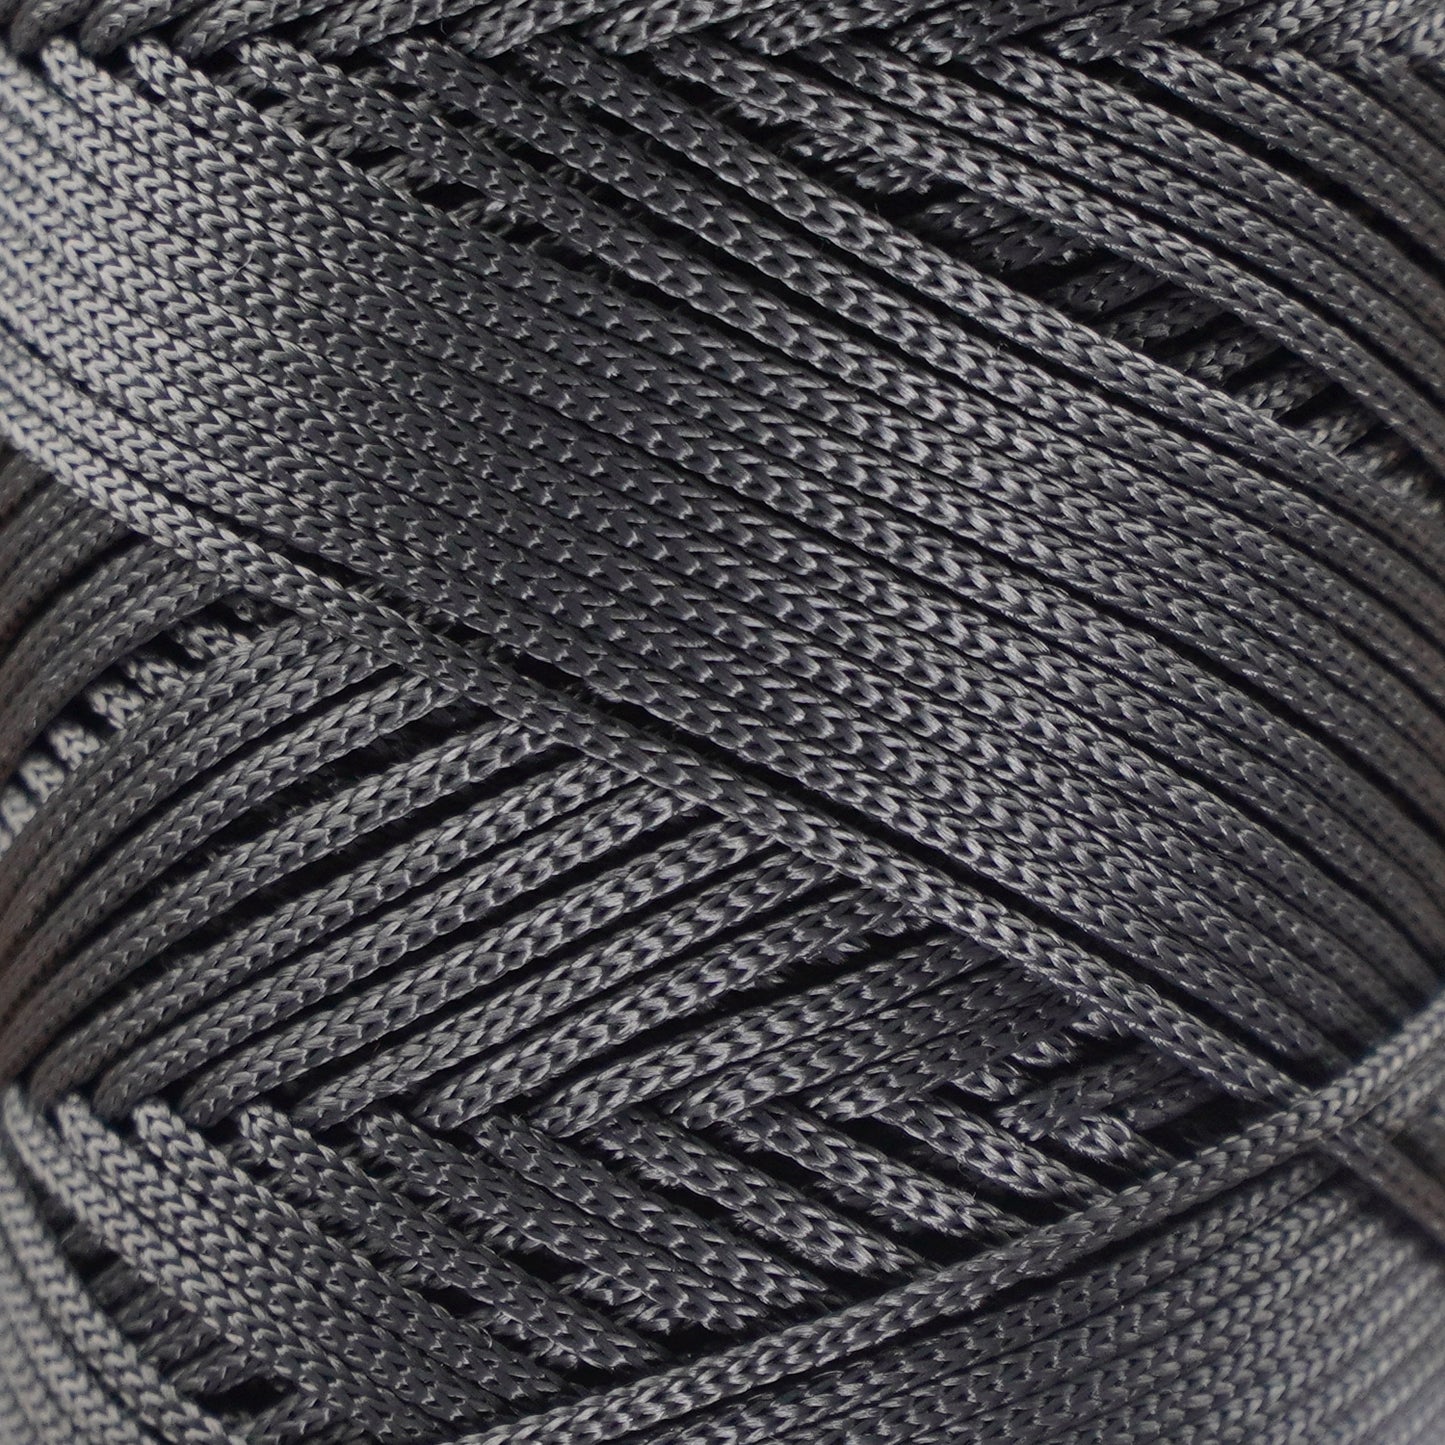 Polyester Macrame Cord 2mm x 250 yards (750 feet)  - Anthracite